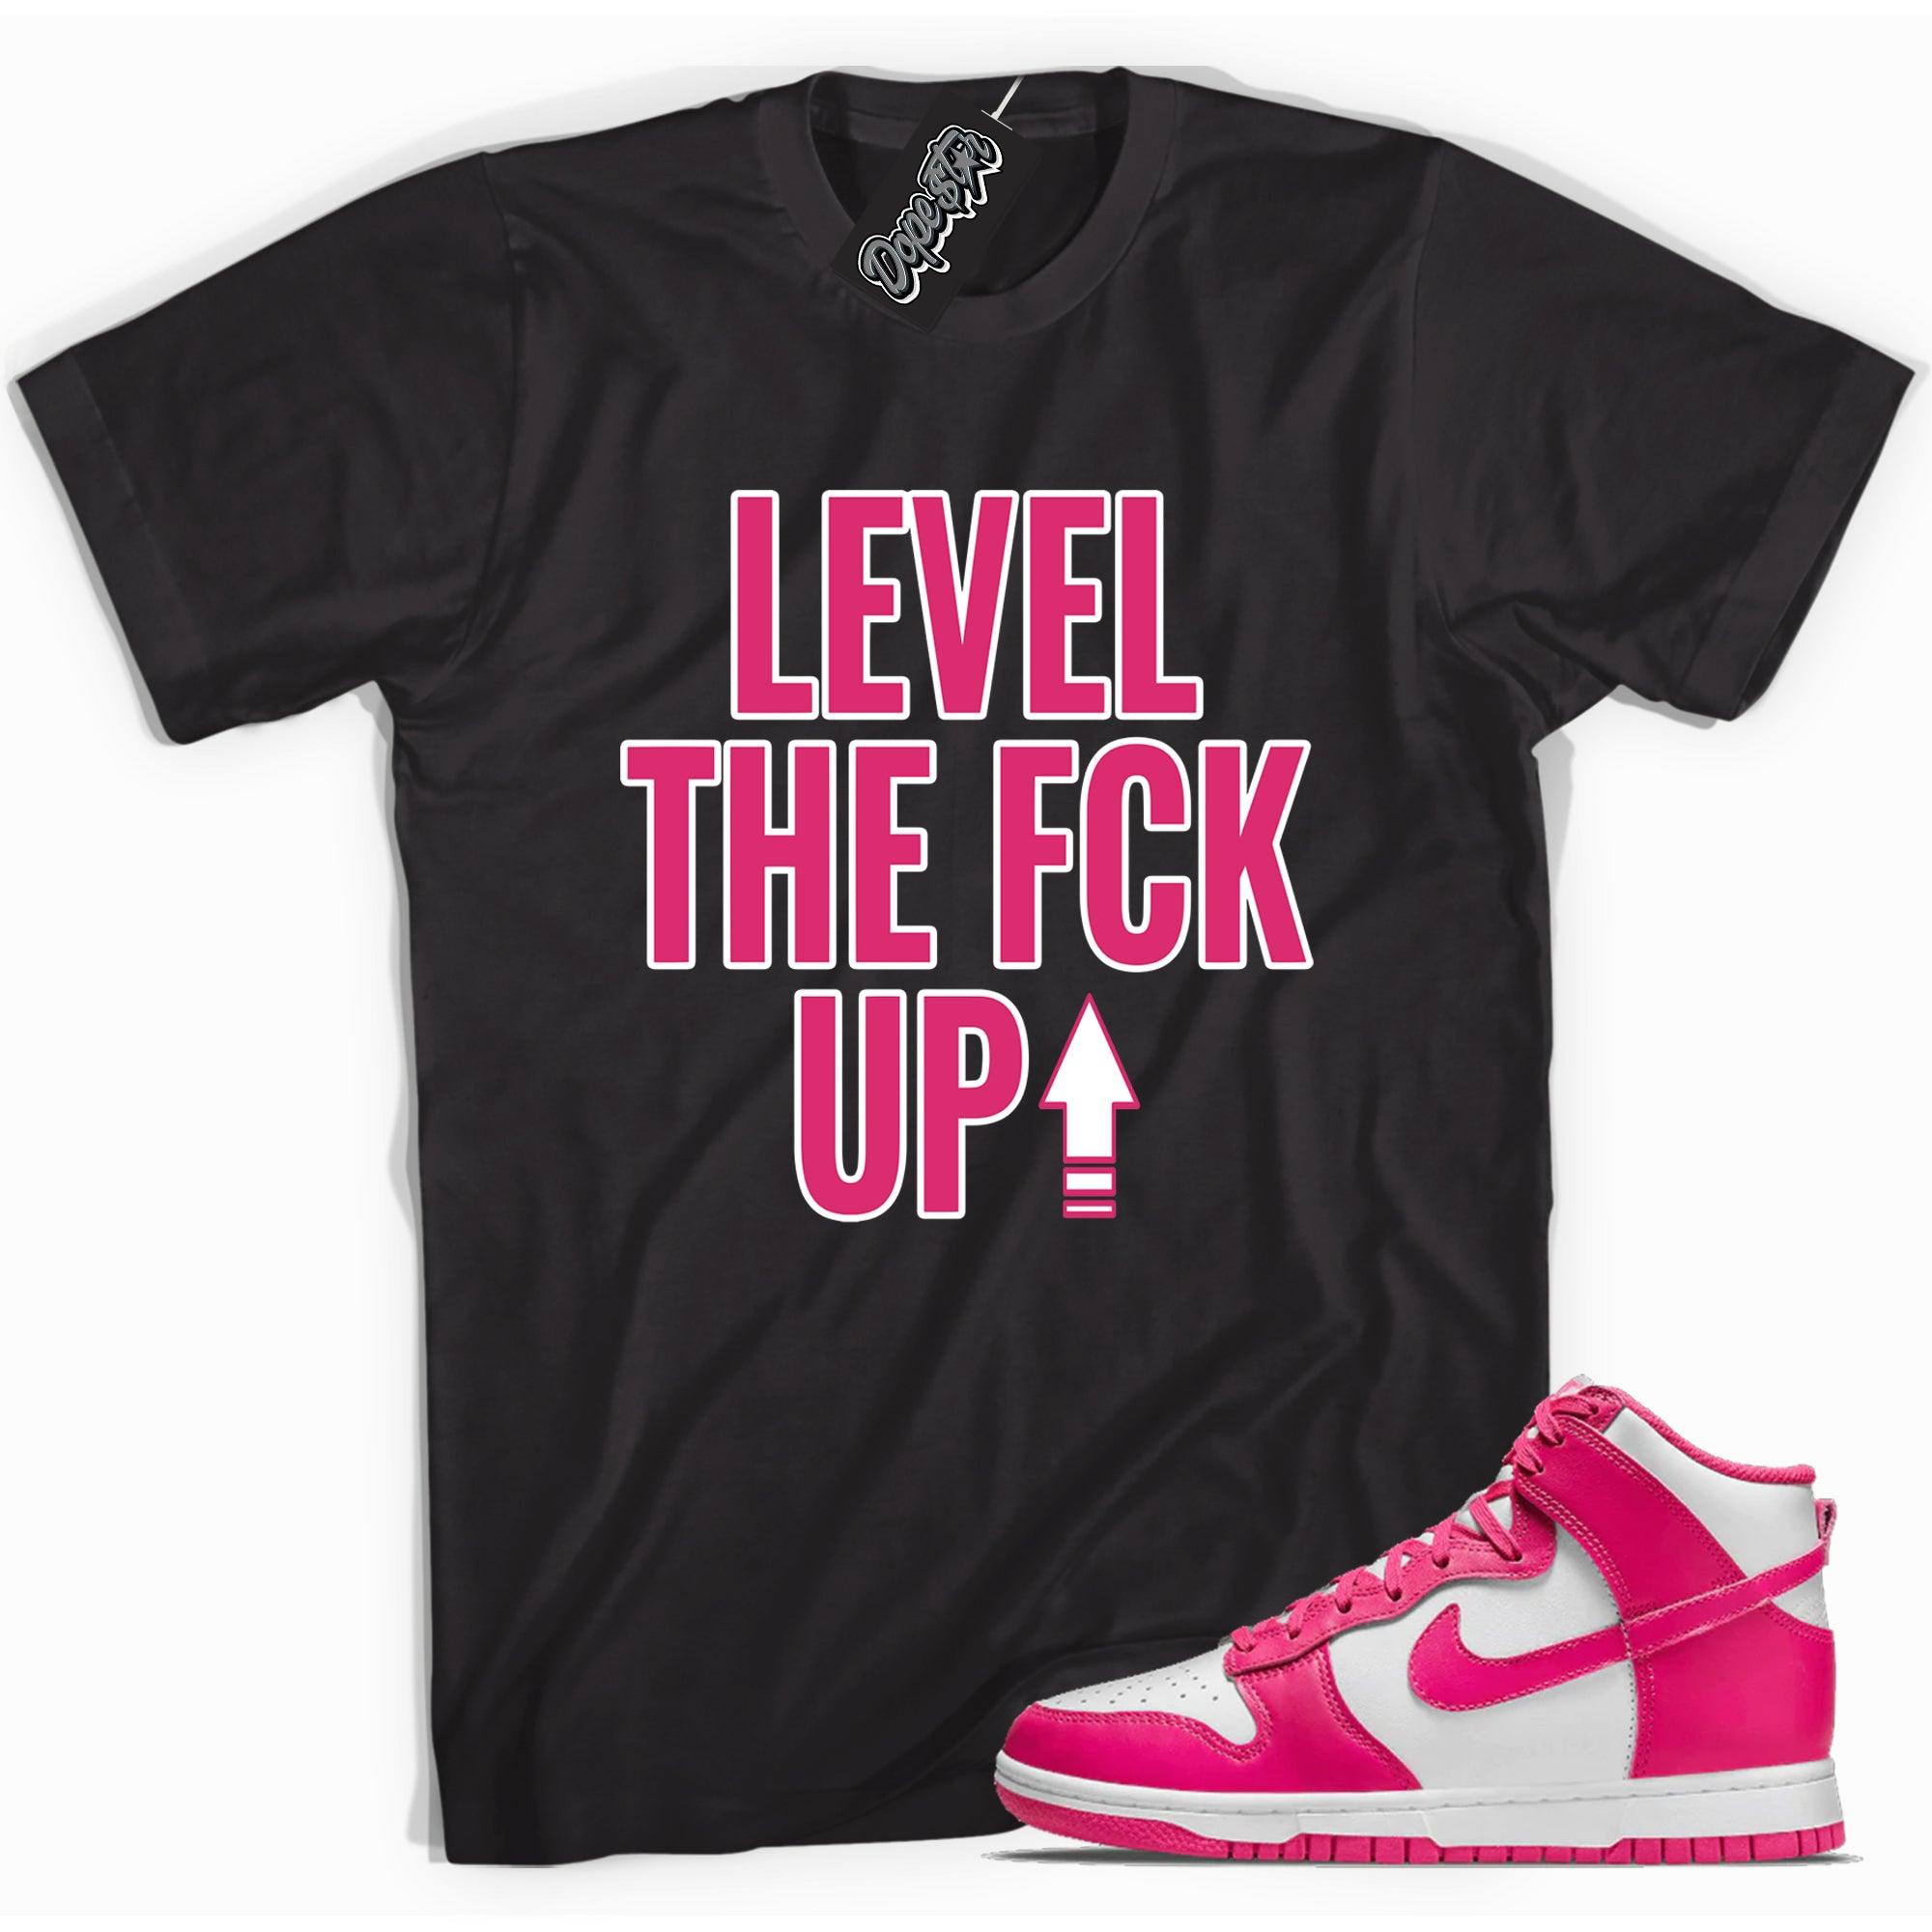 Cool black graphic tee with 'Level Up' print, that perfectly matches Nike Dunk High Pink Prime sneakers.